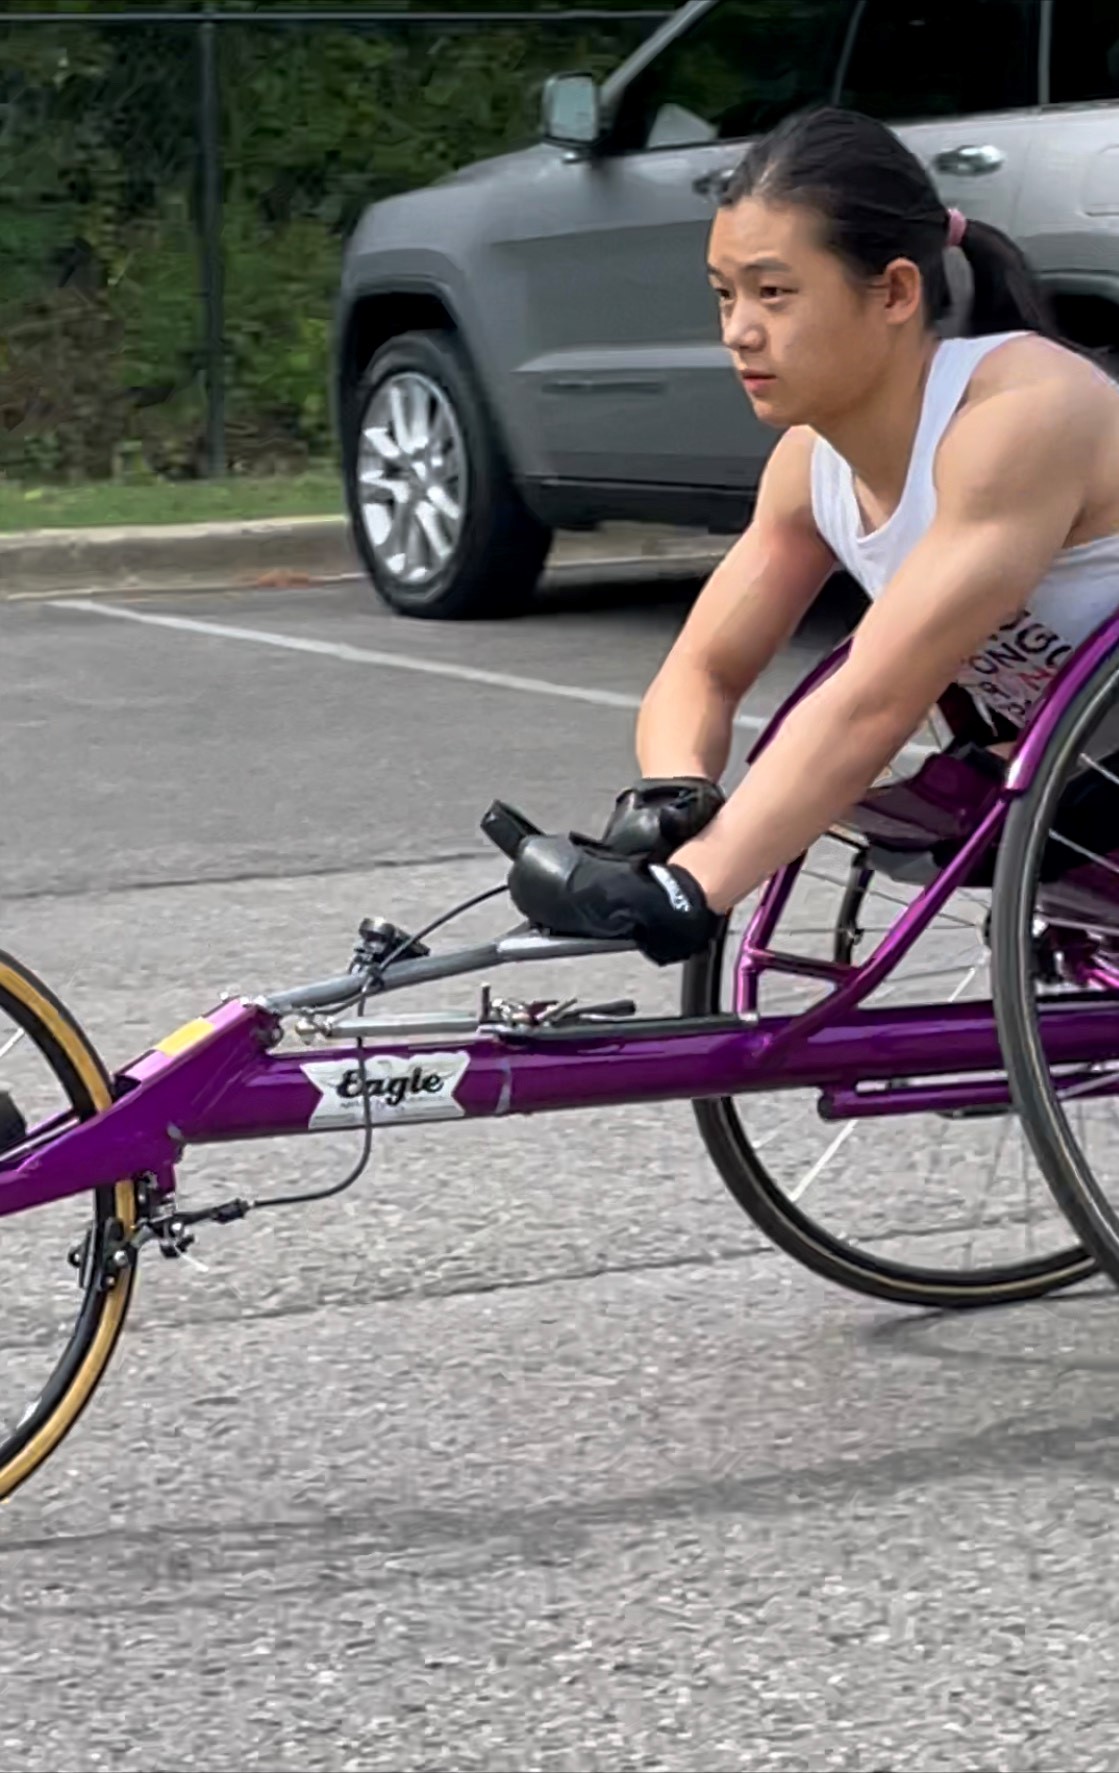 Athlete participating in wheelchair race.